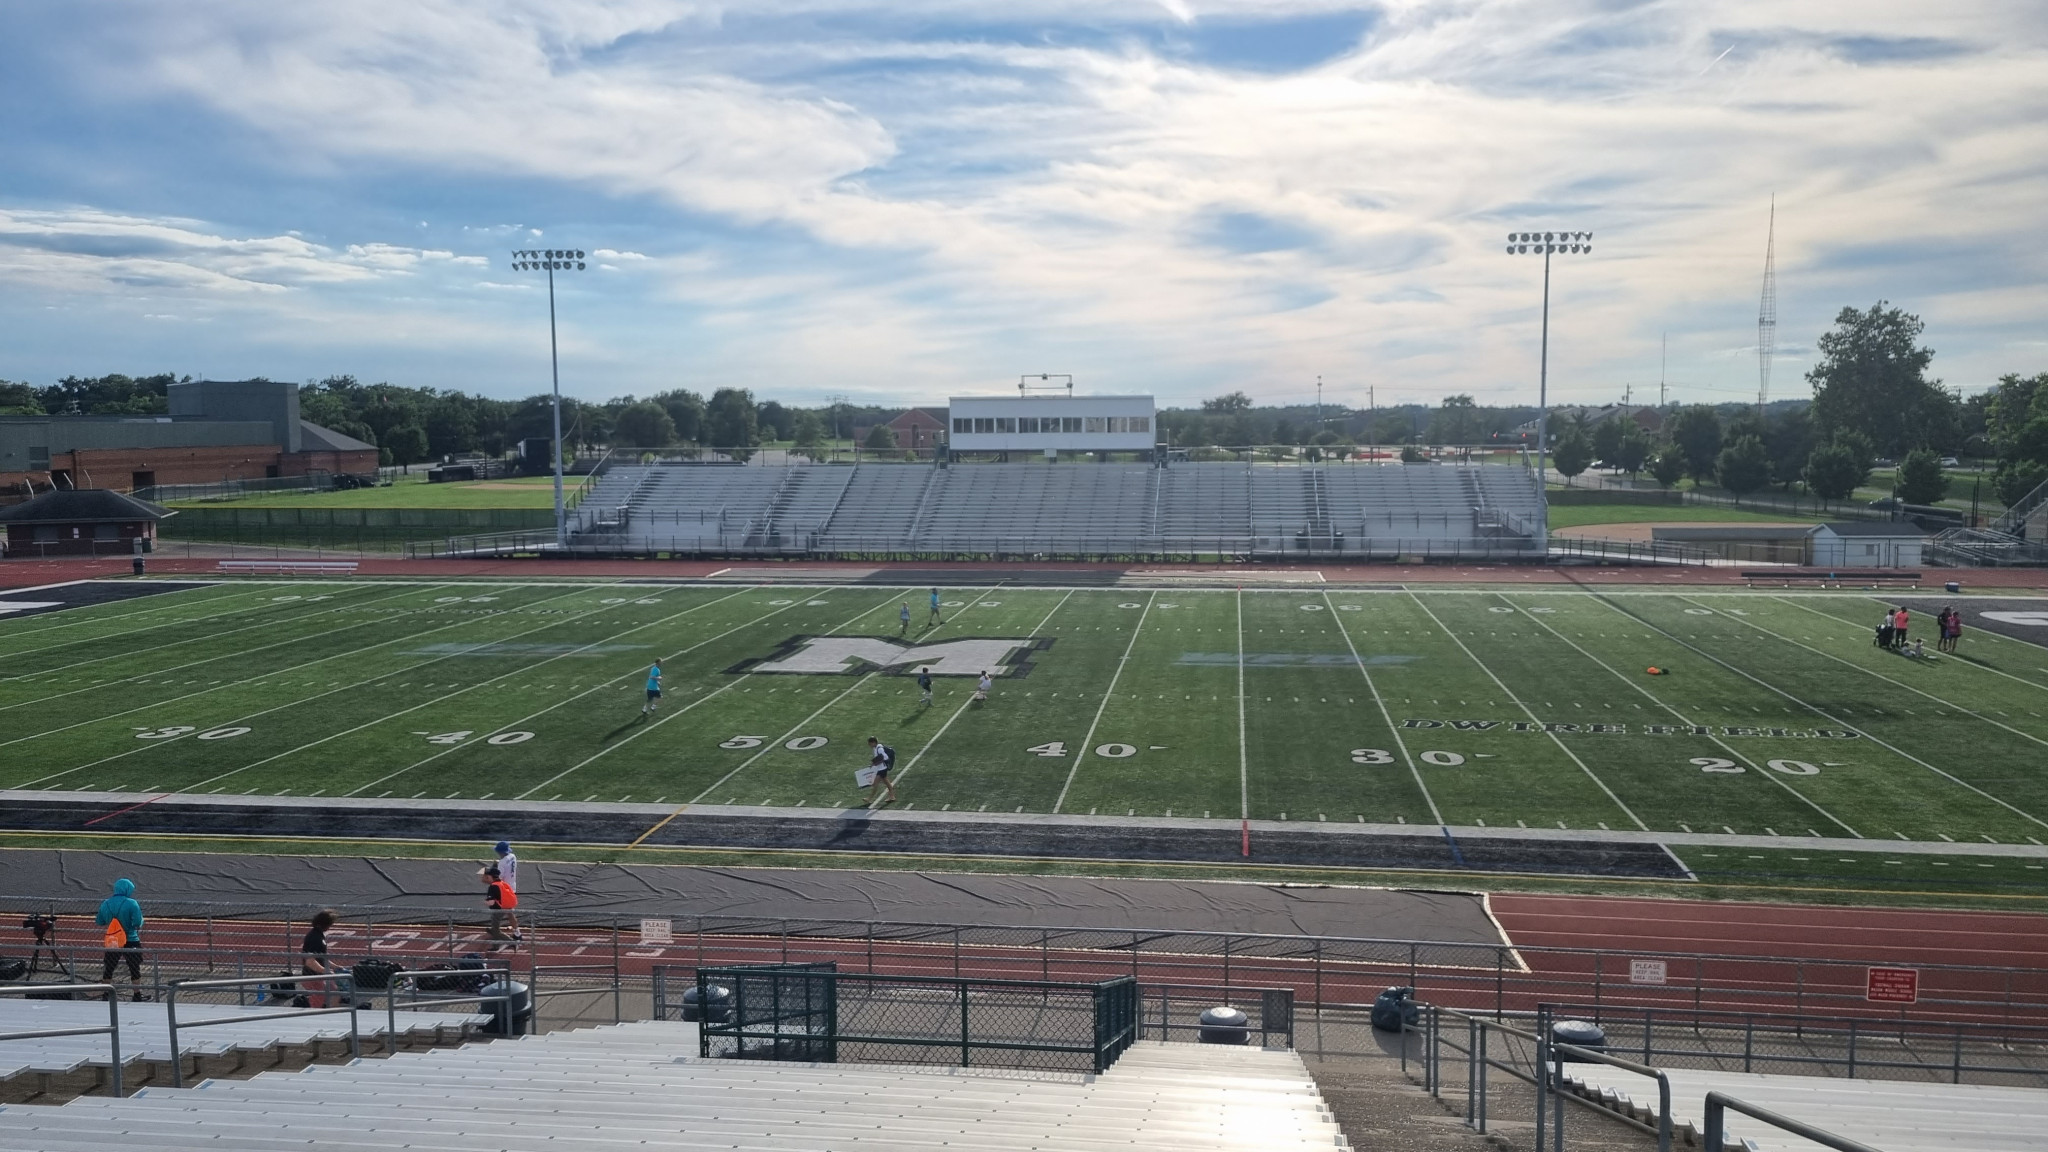 The Mason High School Atrium Stadium hosted the first and final matches of the WFDF World Ultimate Club Championships  ©ITG